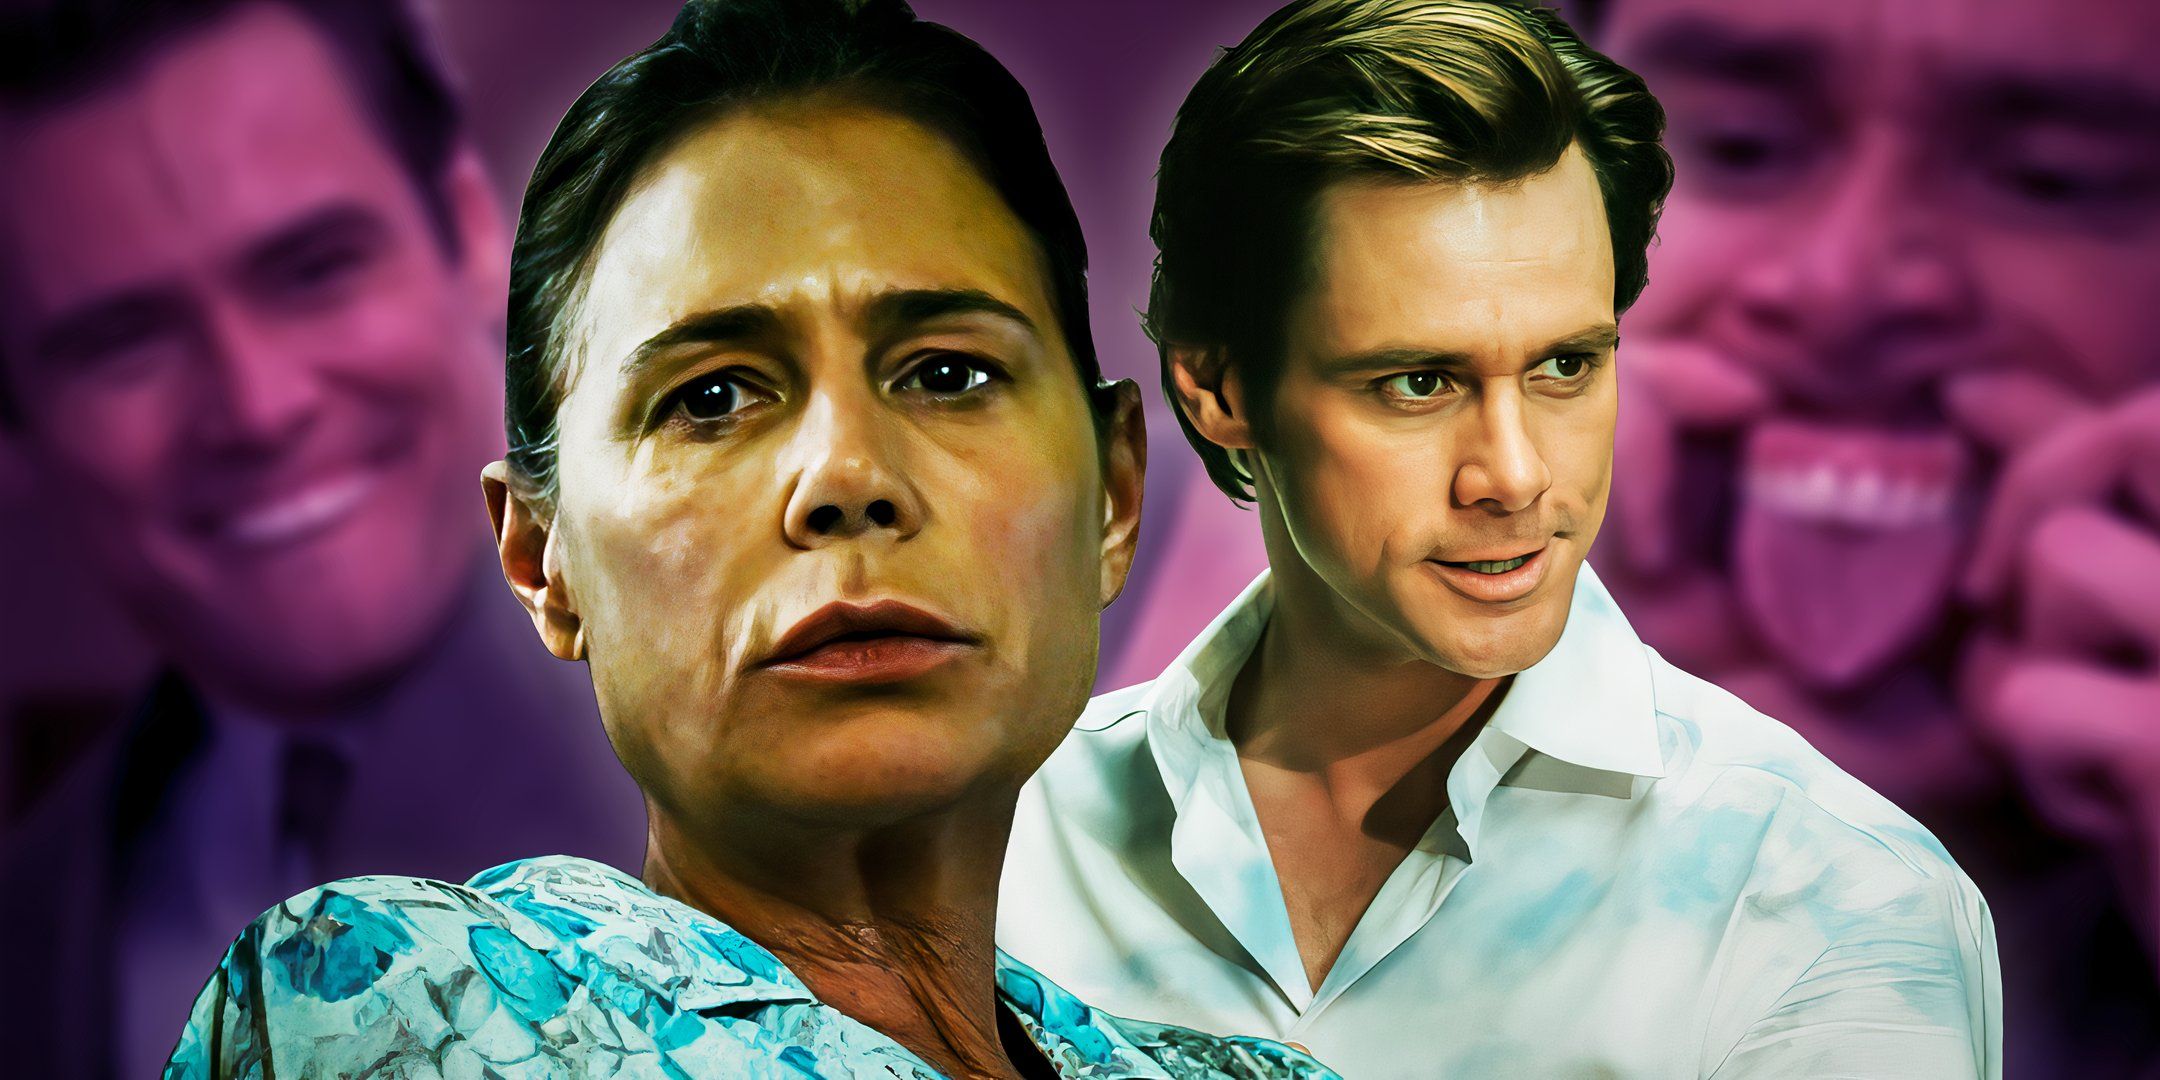 Maura Tierney as Doris in The Iron Claw and Jim Carrey in Liar Liar